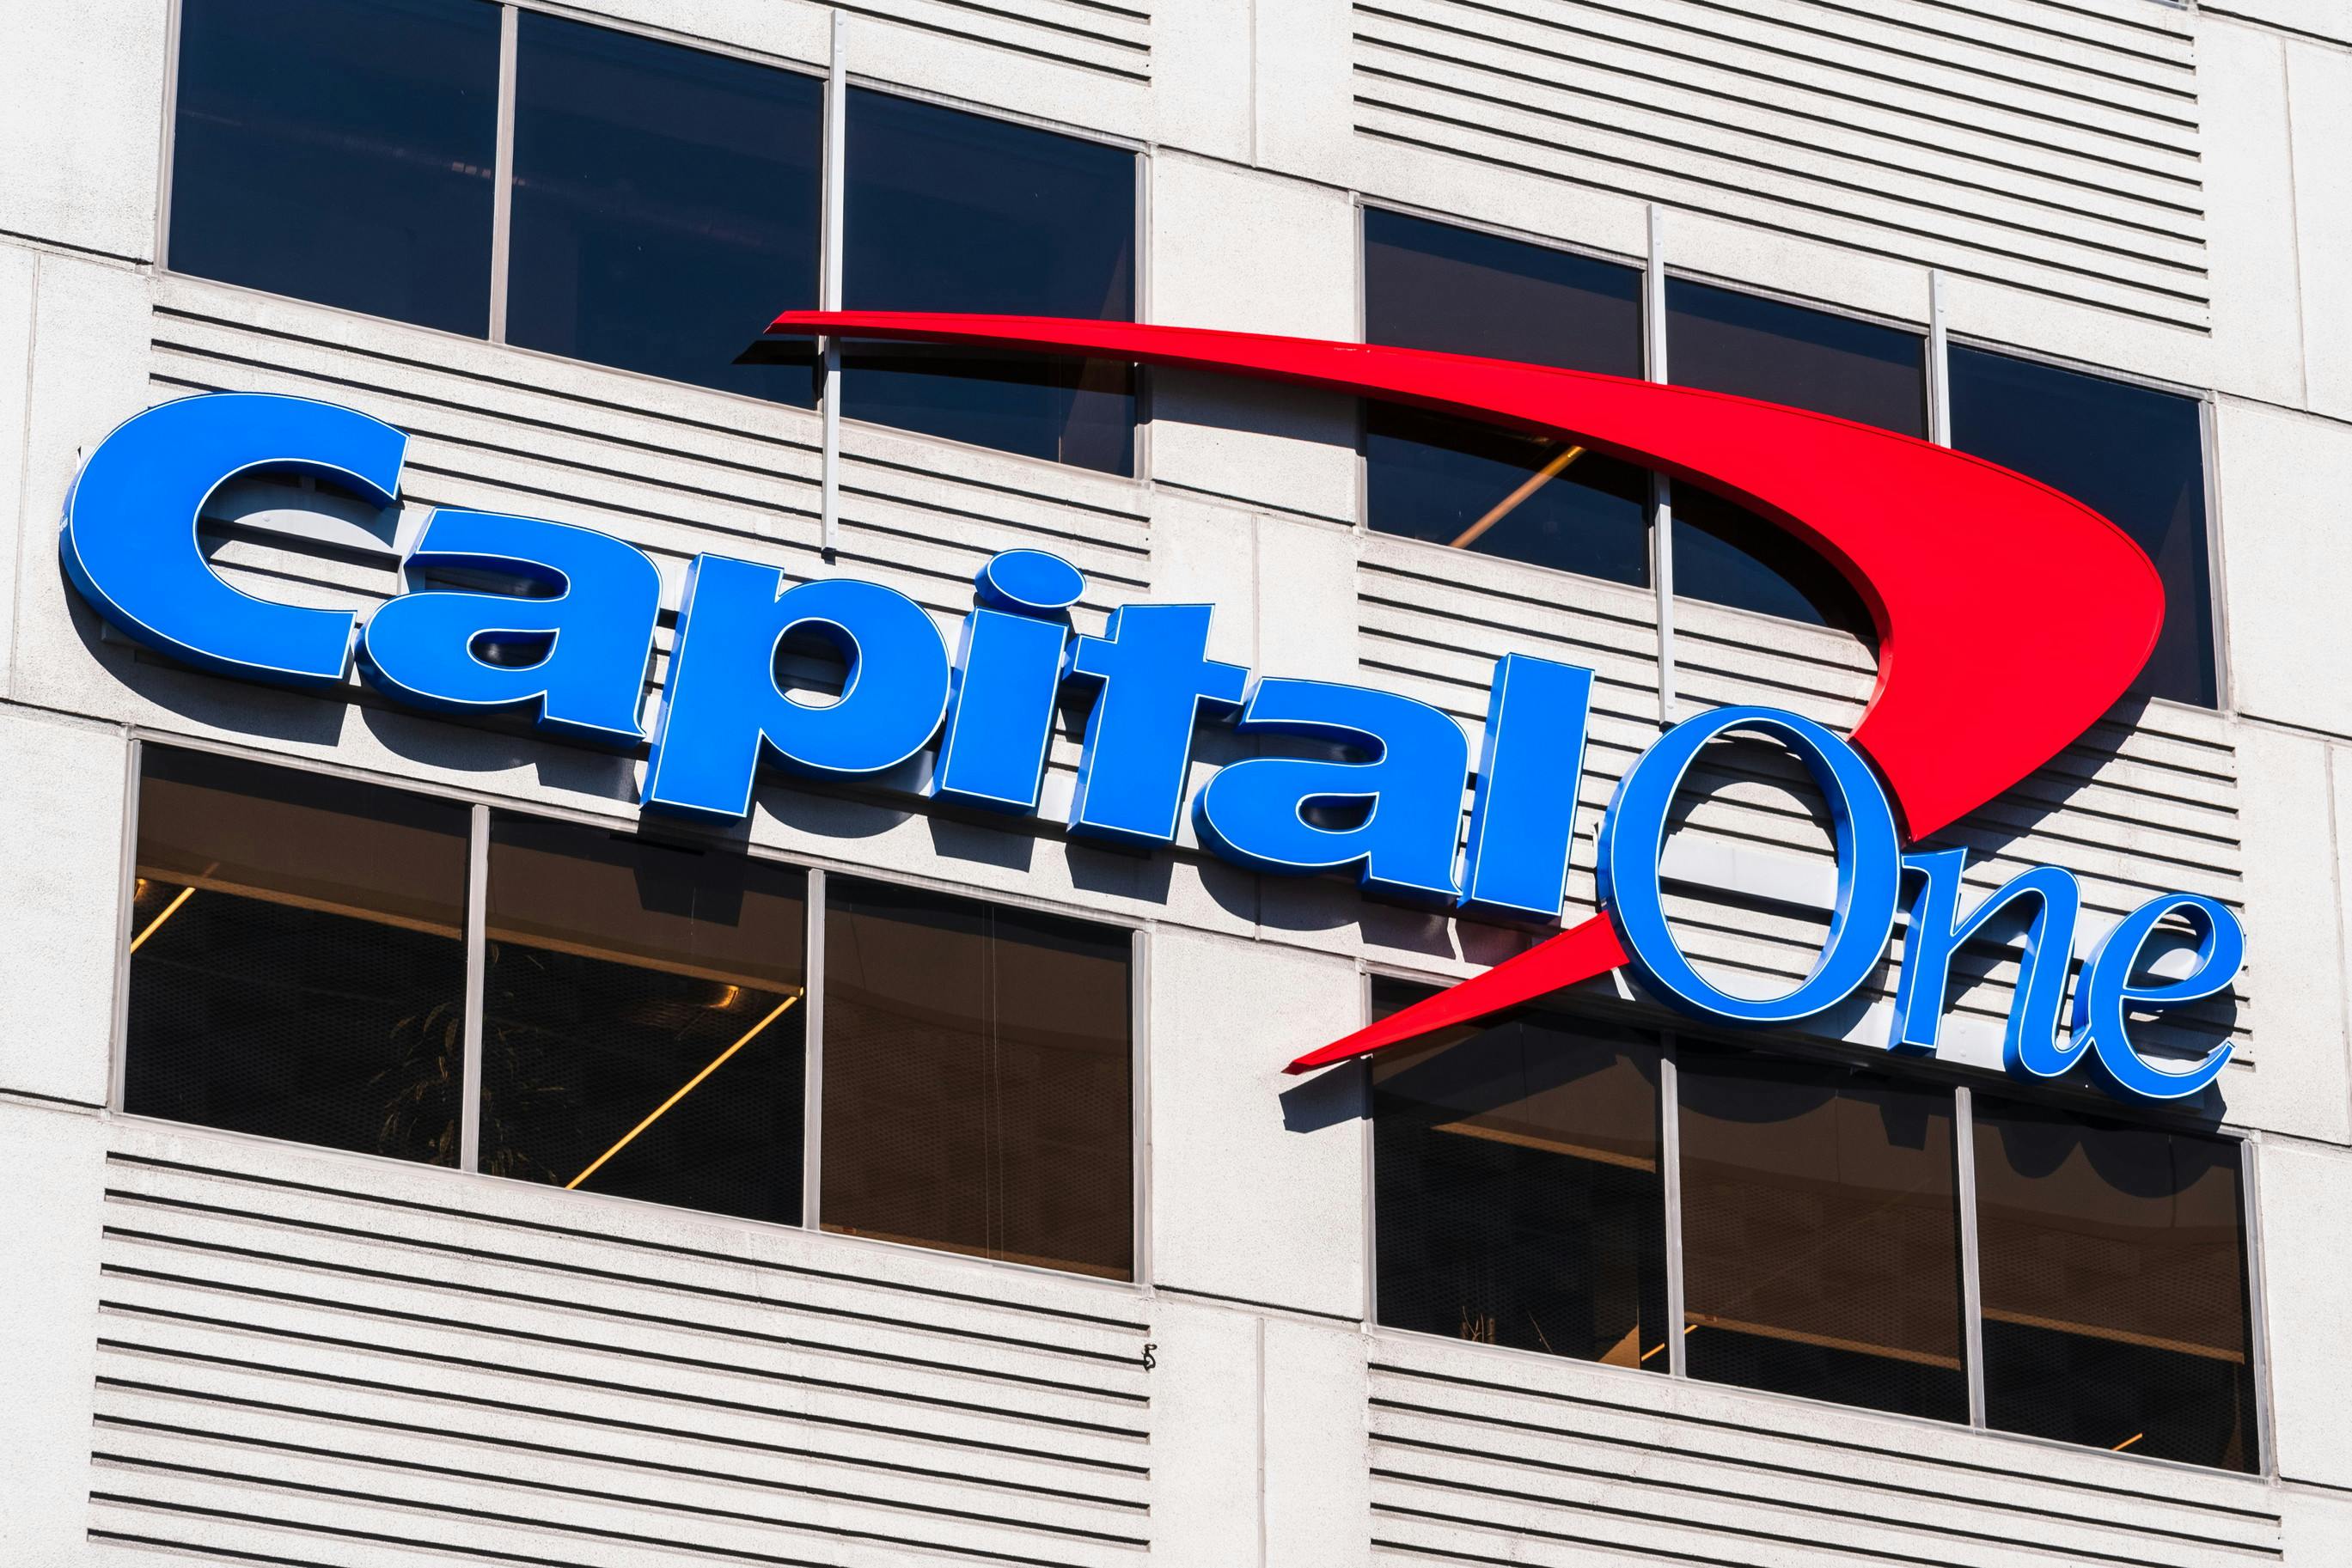 Capital One logo on the side of a building